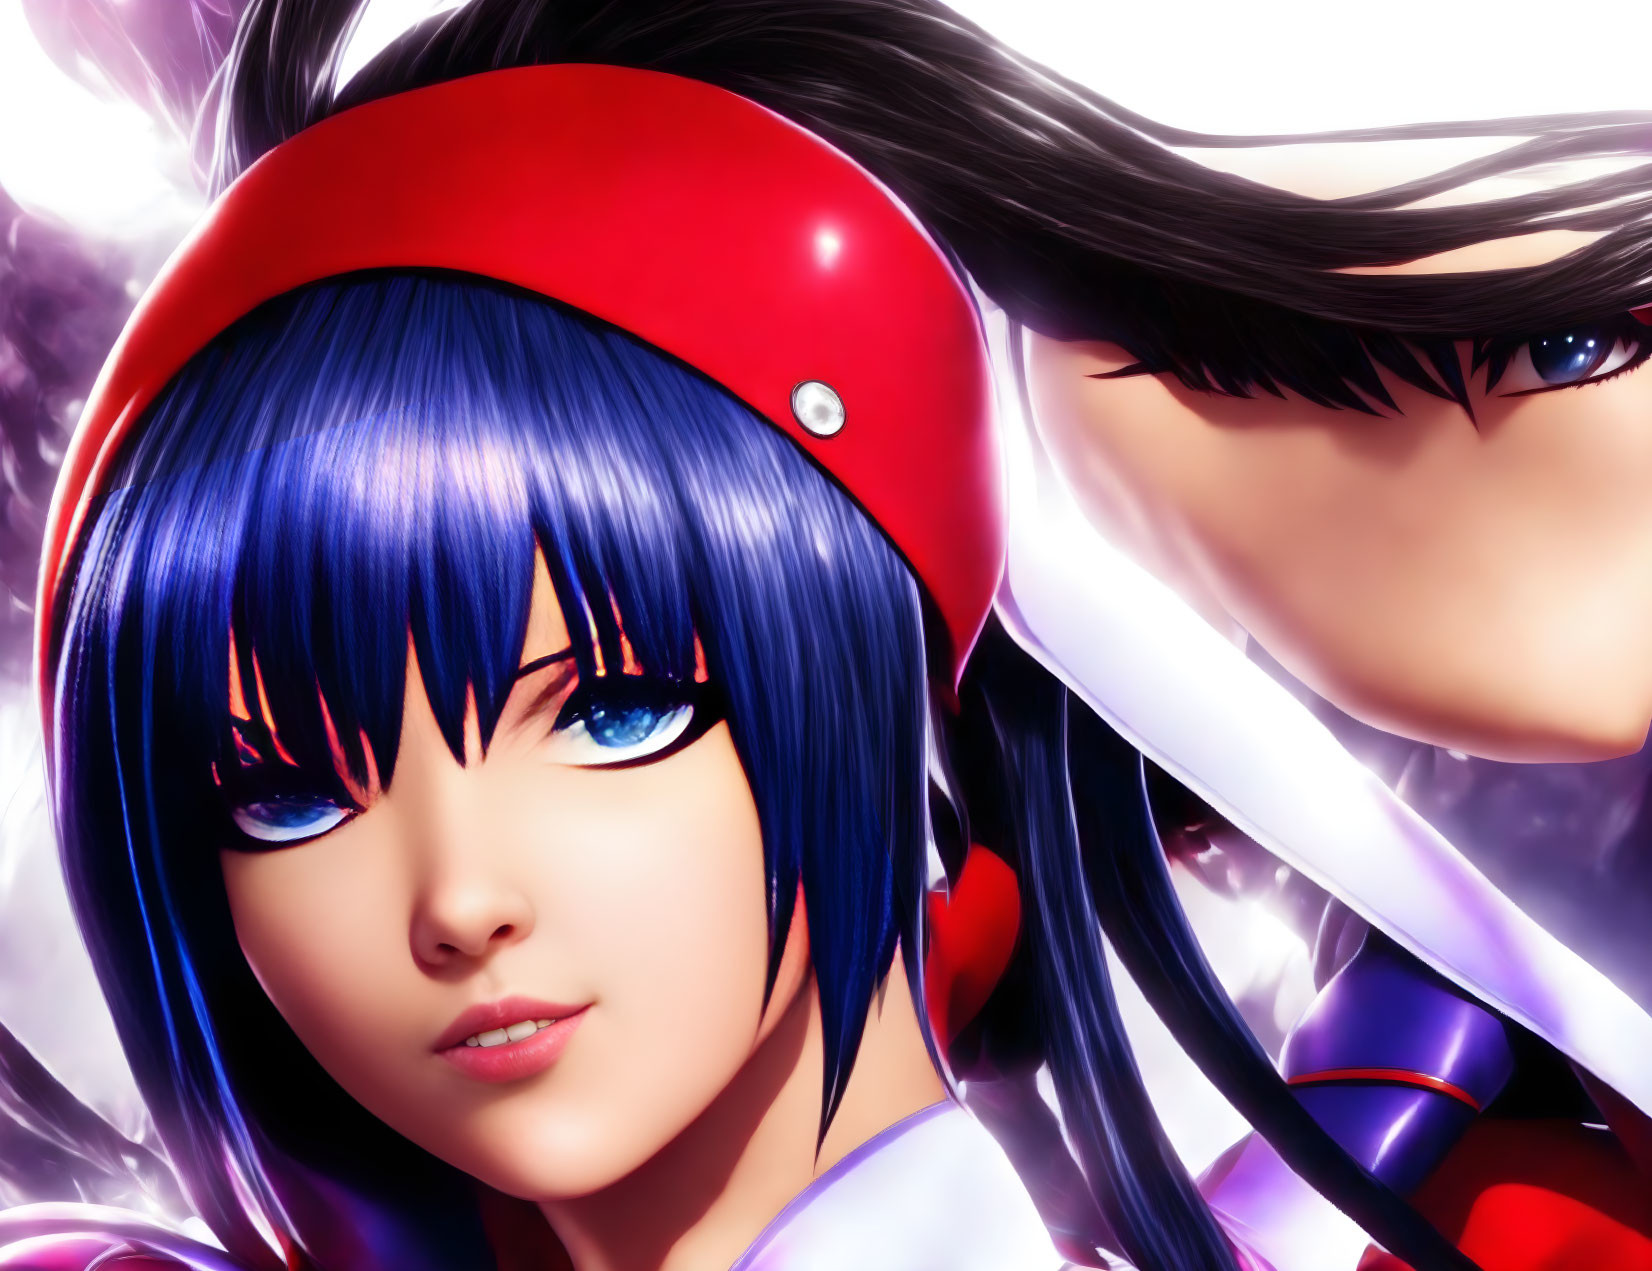  Anime version, Shermie by king of fighters